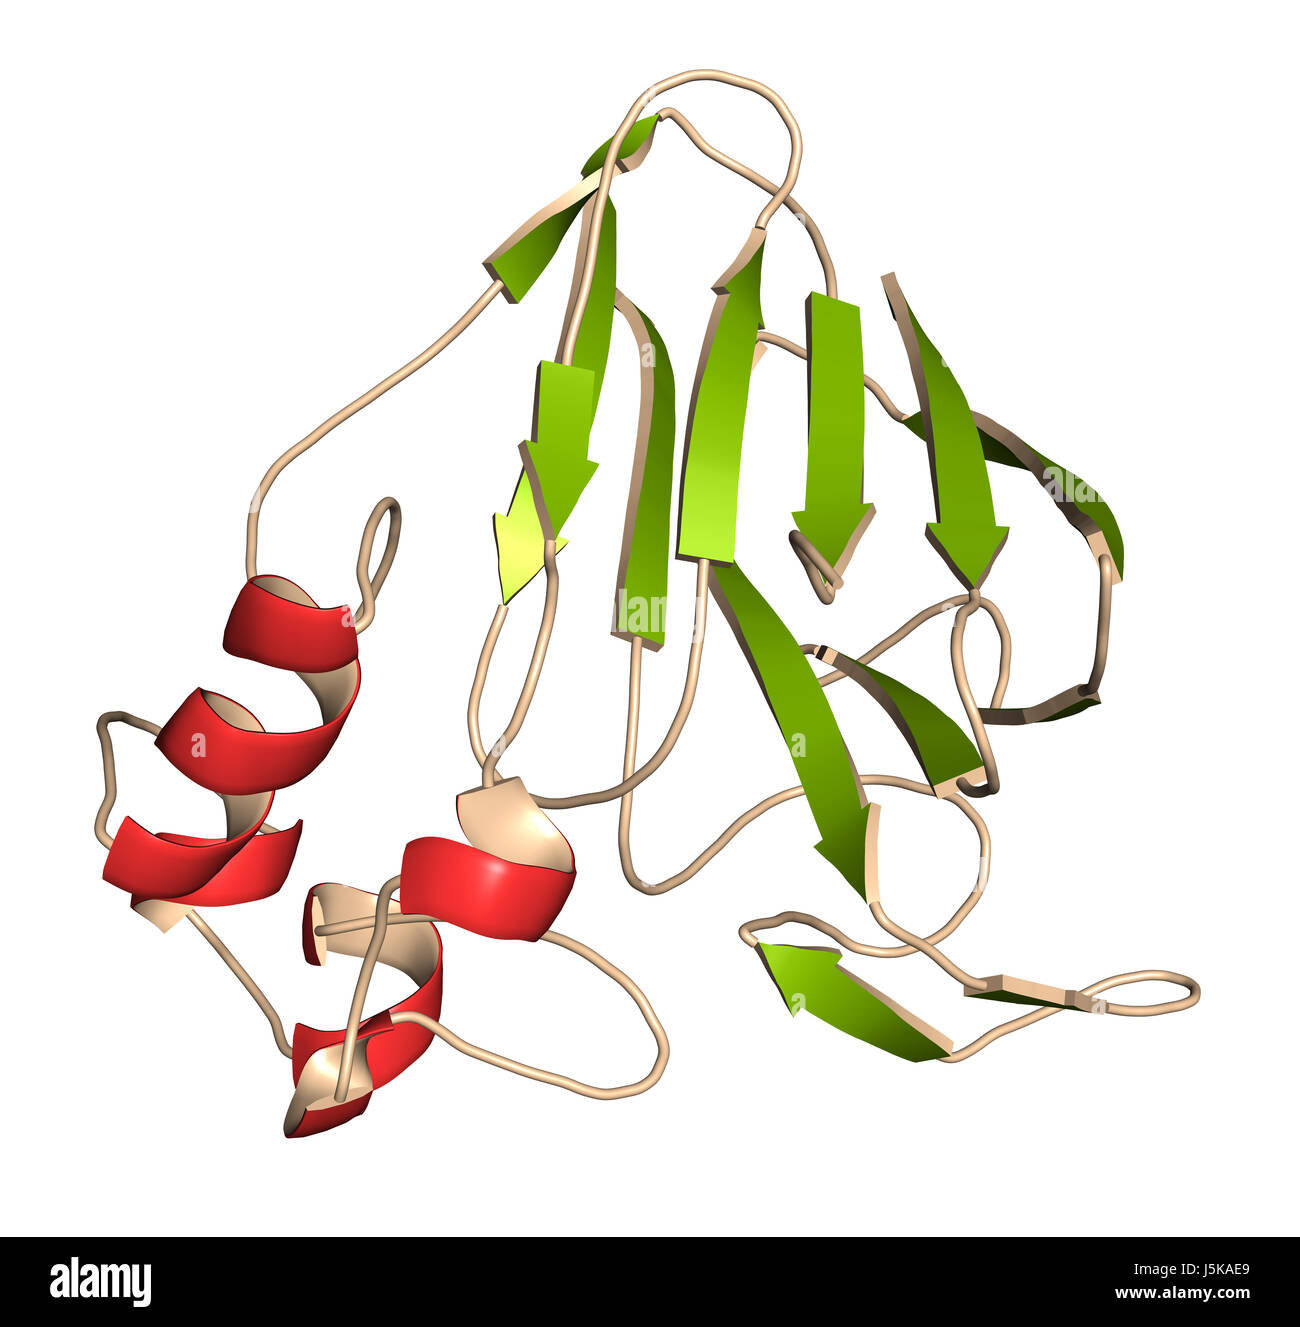 Thaumatin sweetener protein. Isolated from katemfe fruit. 3D rendering based on protein data bank entry 5lh7. Cartoon representation. Stock Photo